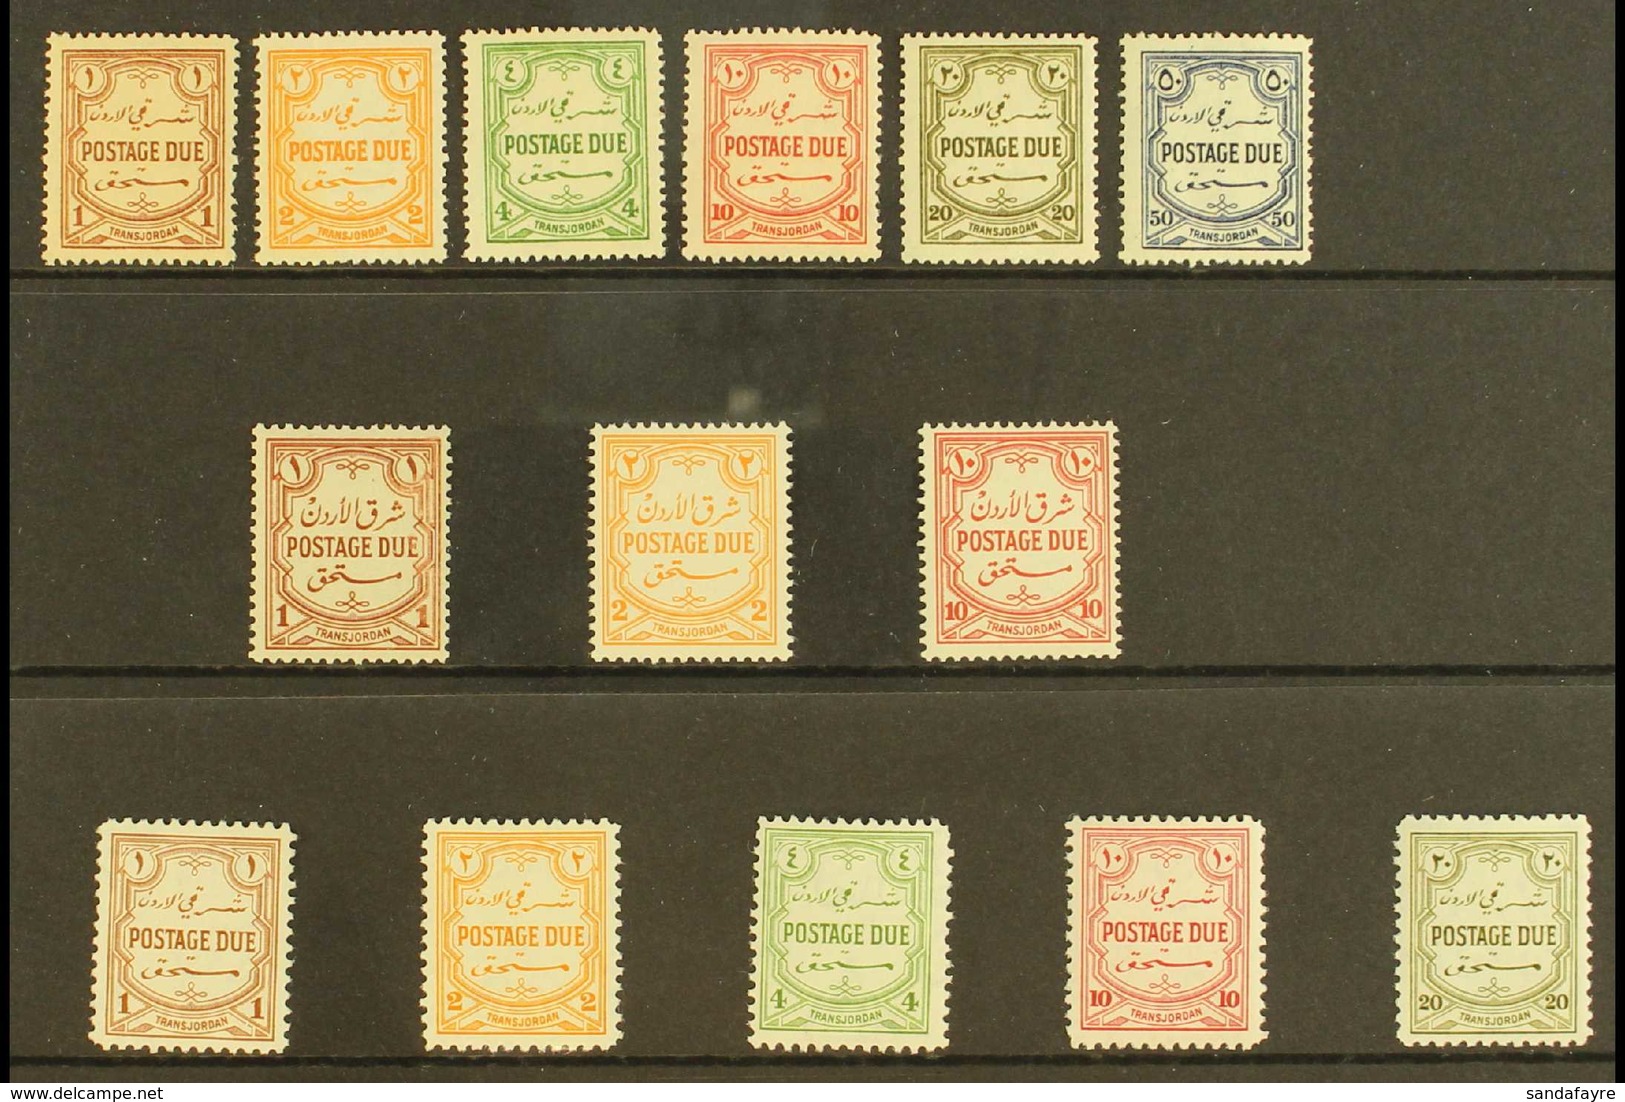 POSTAGE DUE 1929-49 MINT COLLECTION. A Complete Run From 1929-49, SG D189/94, SG D230/32 & SG D244/48, A Fine Mint Group - Jordanie